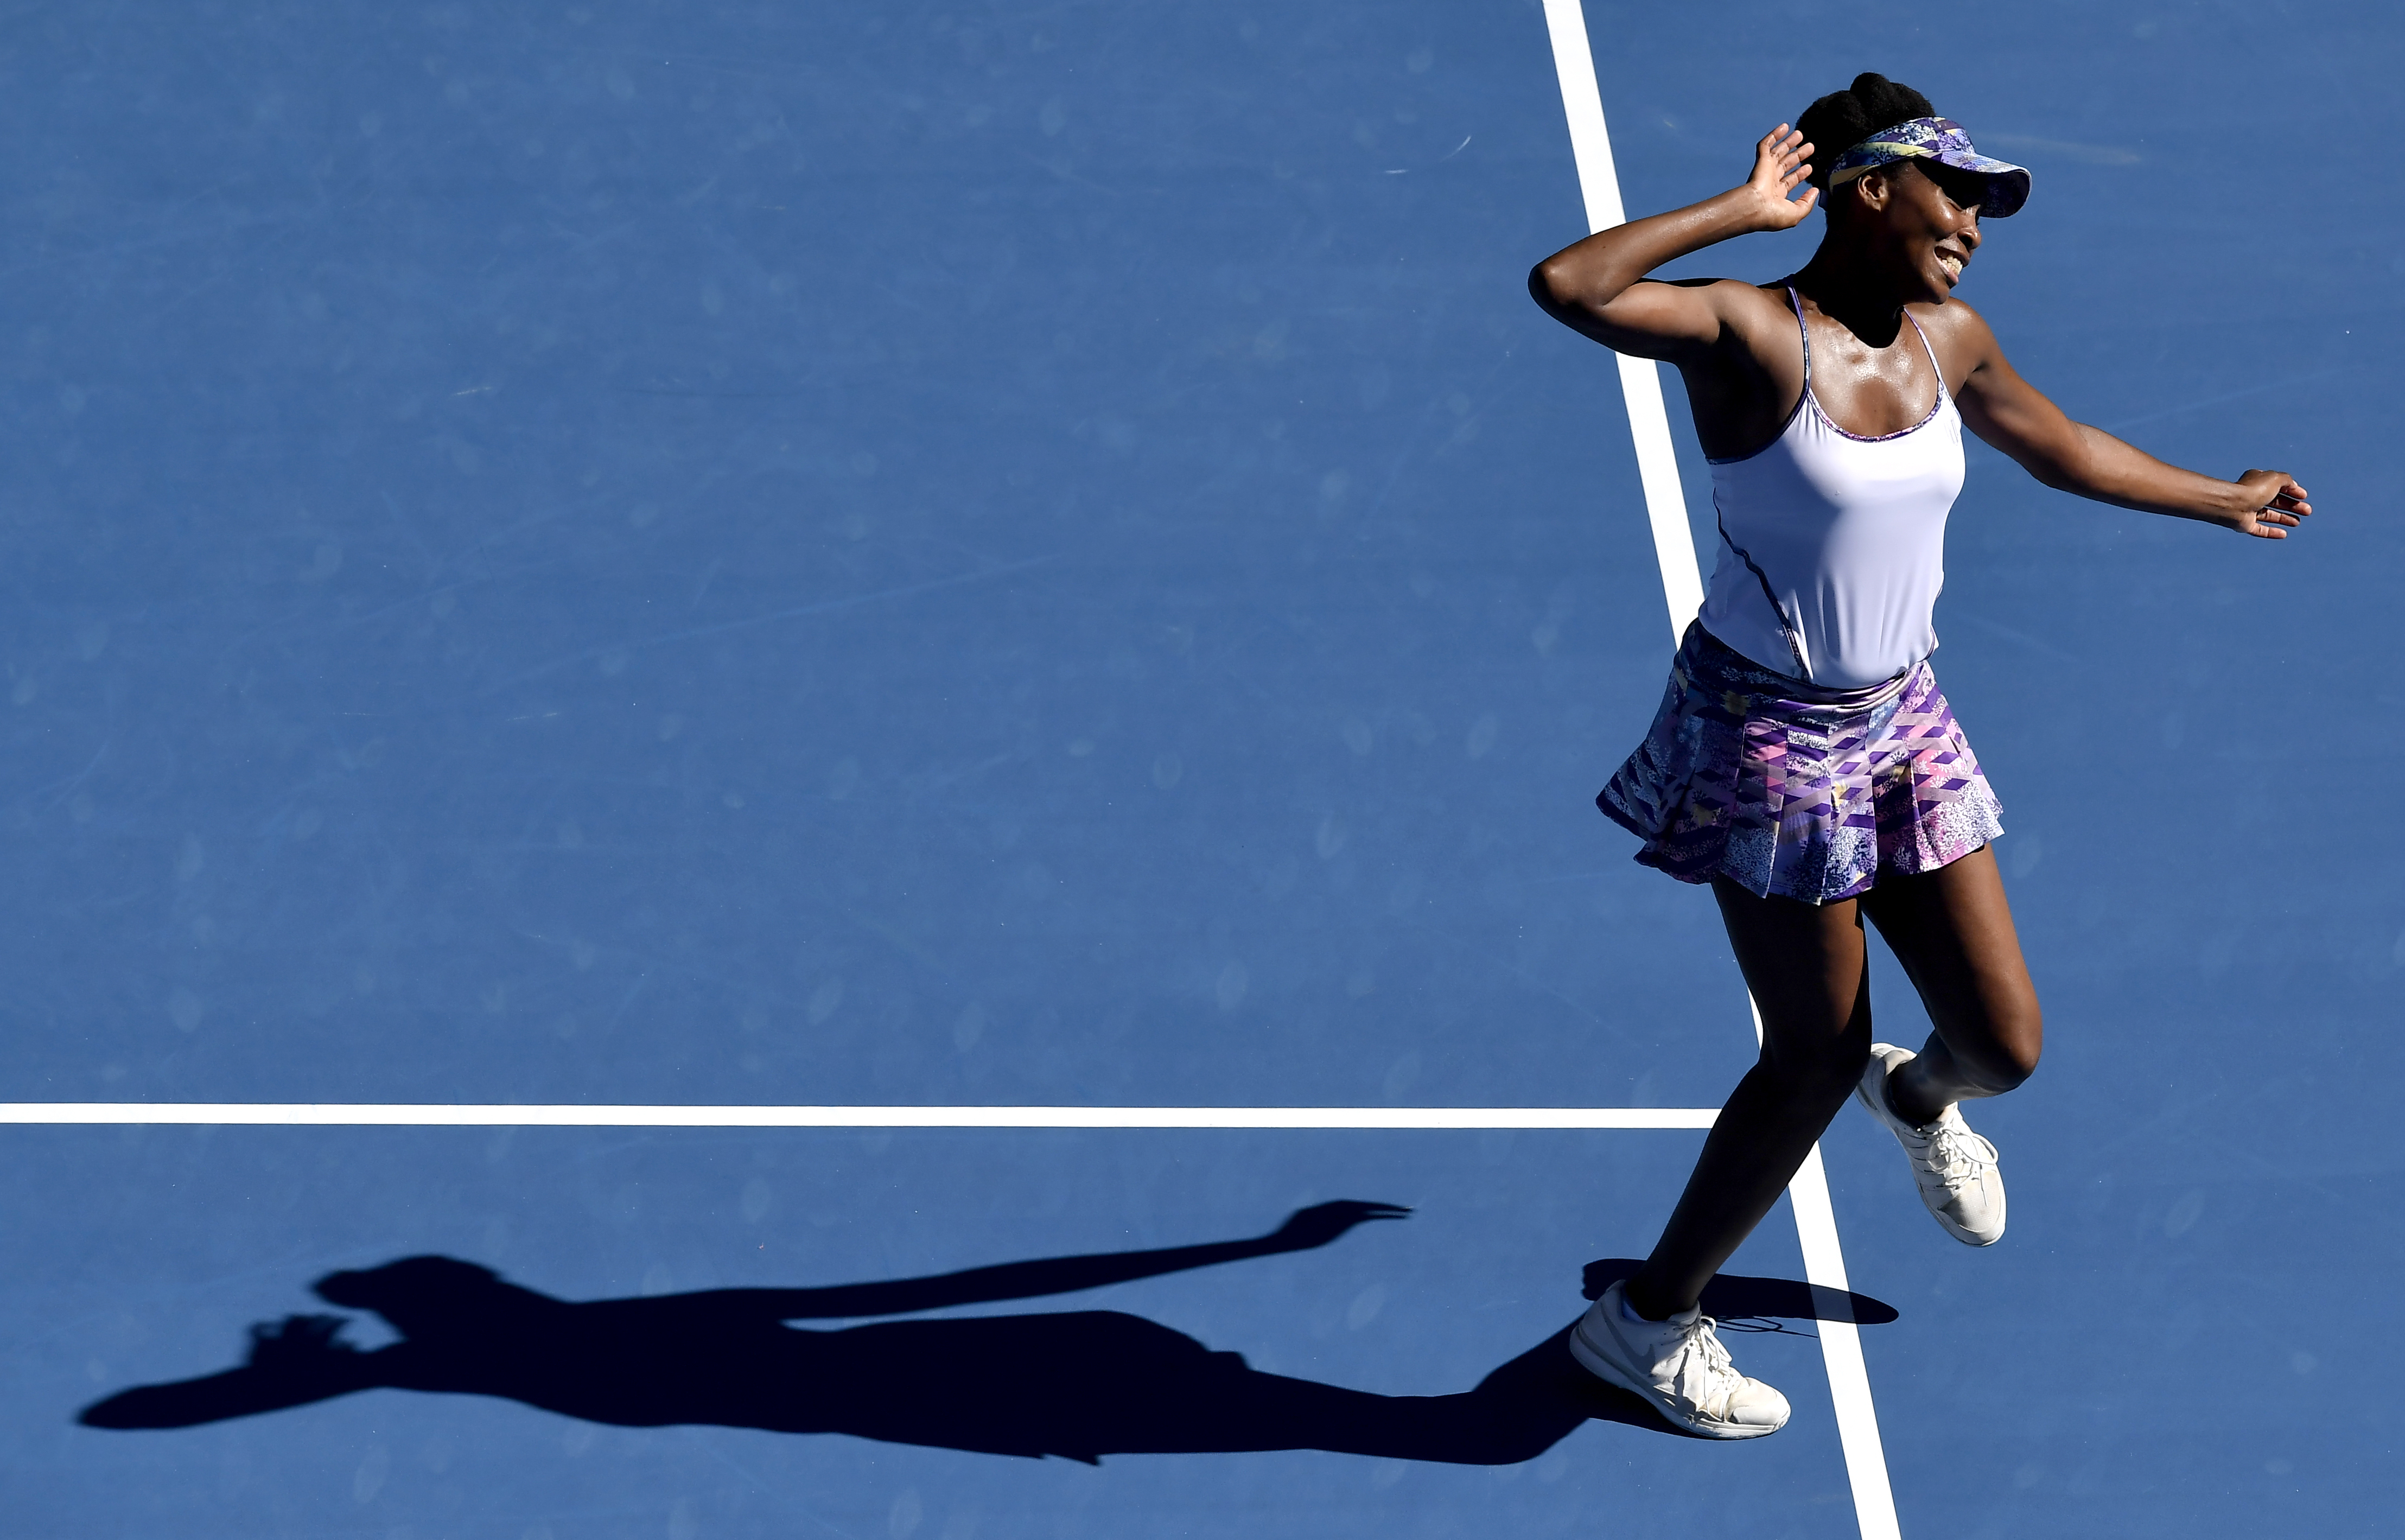 United States' Venus Williams celebrates after defeating compatriot Coco Vandeweghe during their semifinal at the Australian Open tennis championships in Melbourne, Australia, Thursday, Jan. 26, 2017. (AP Photo/Andy Brownbill)